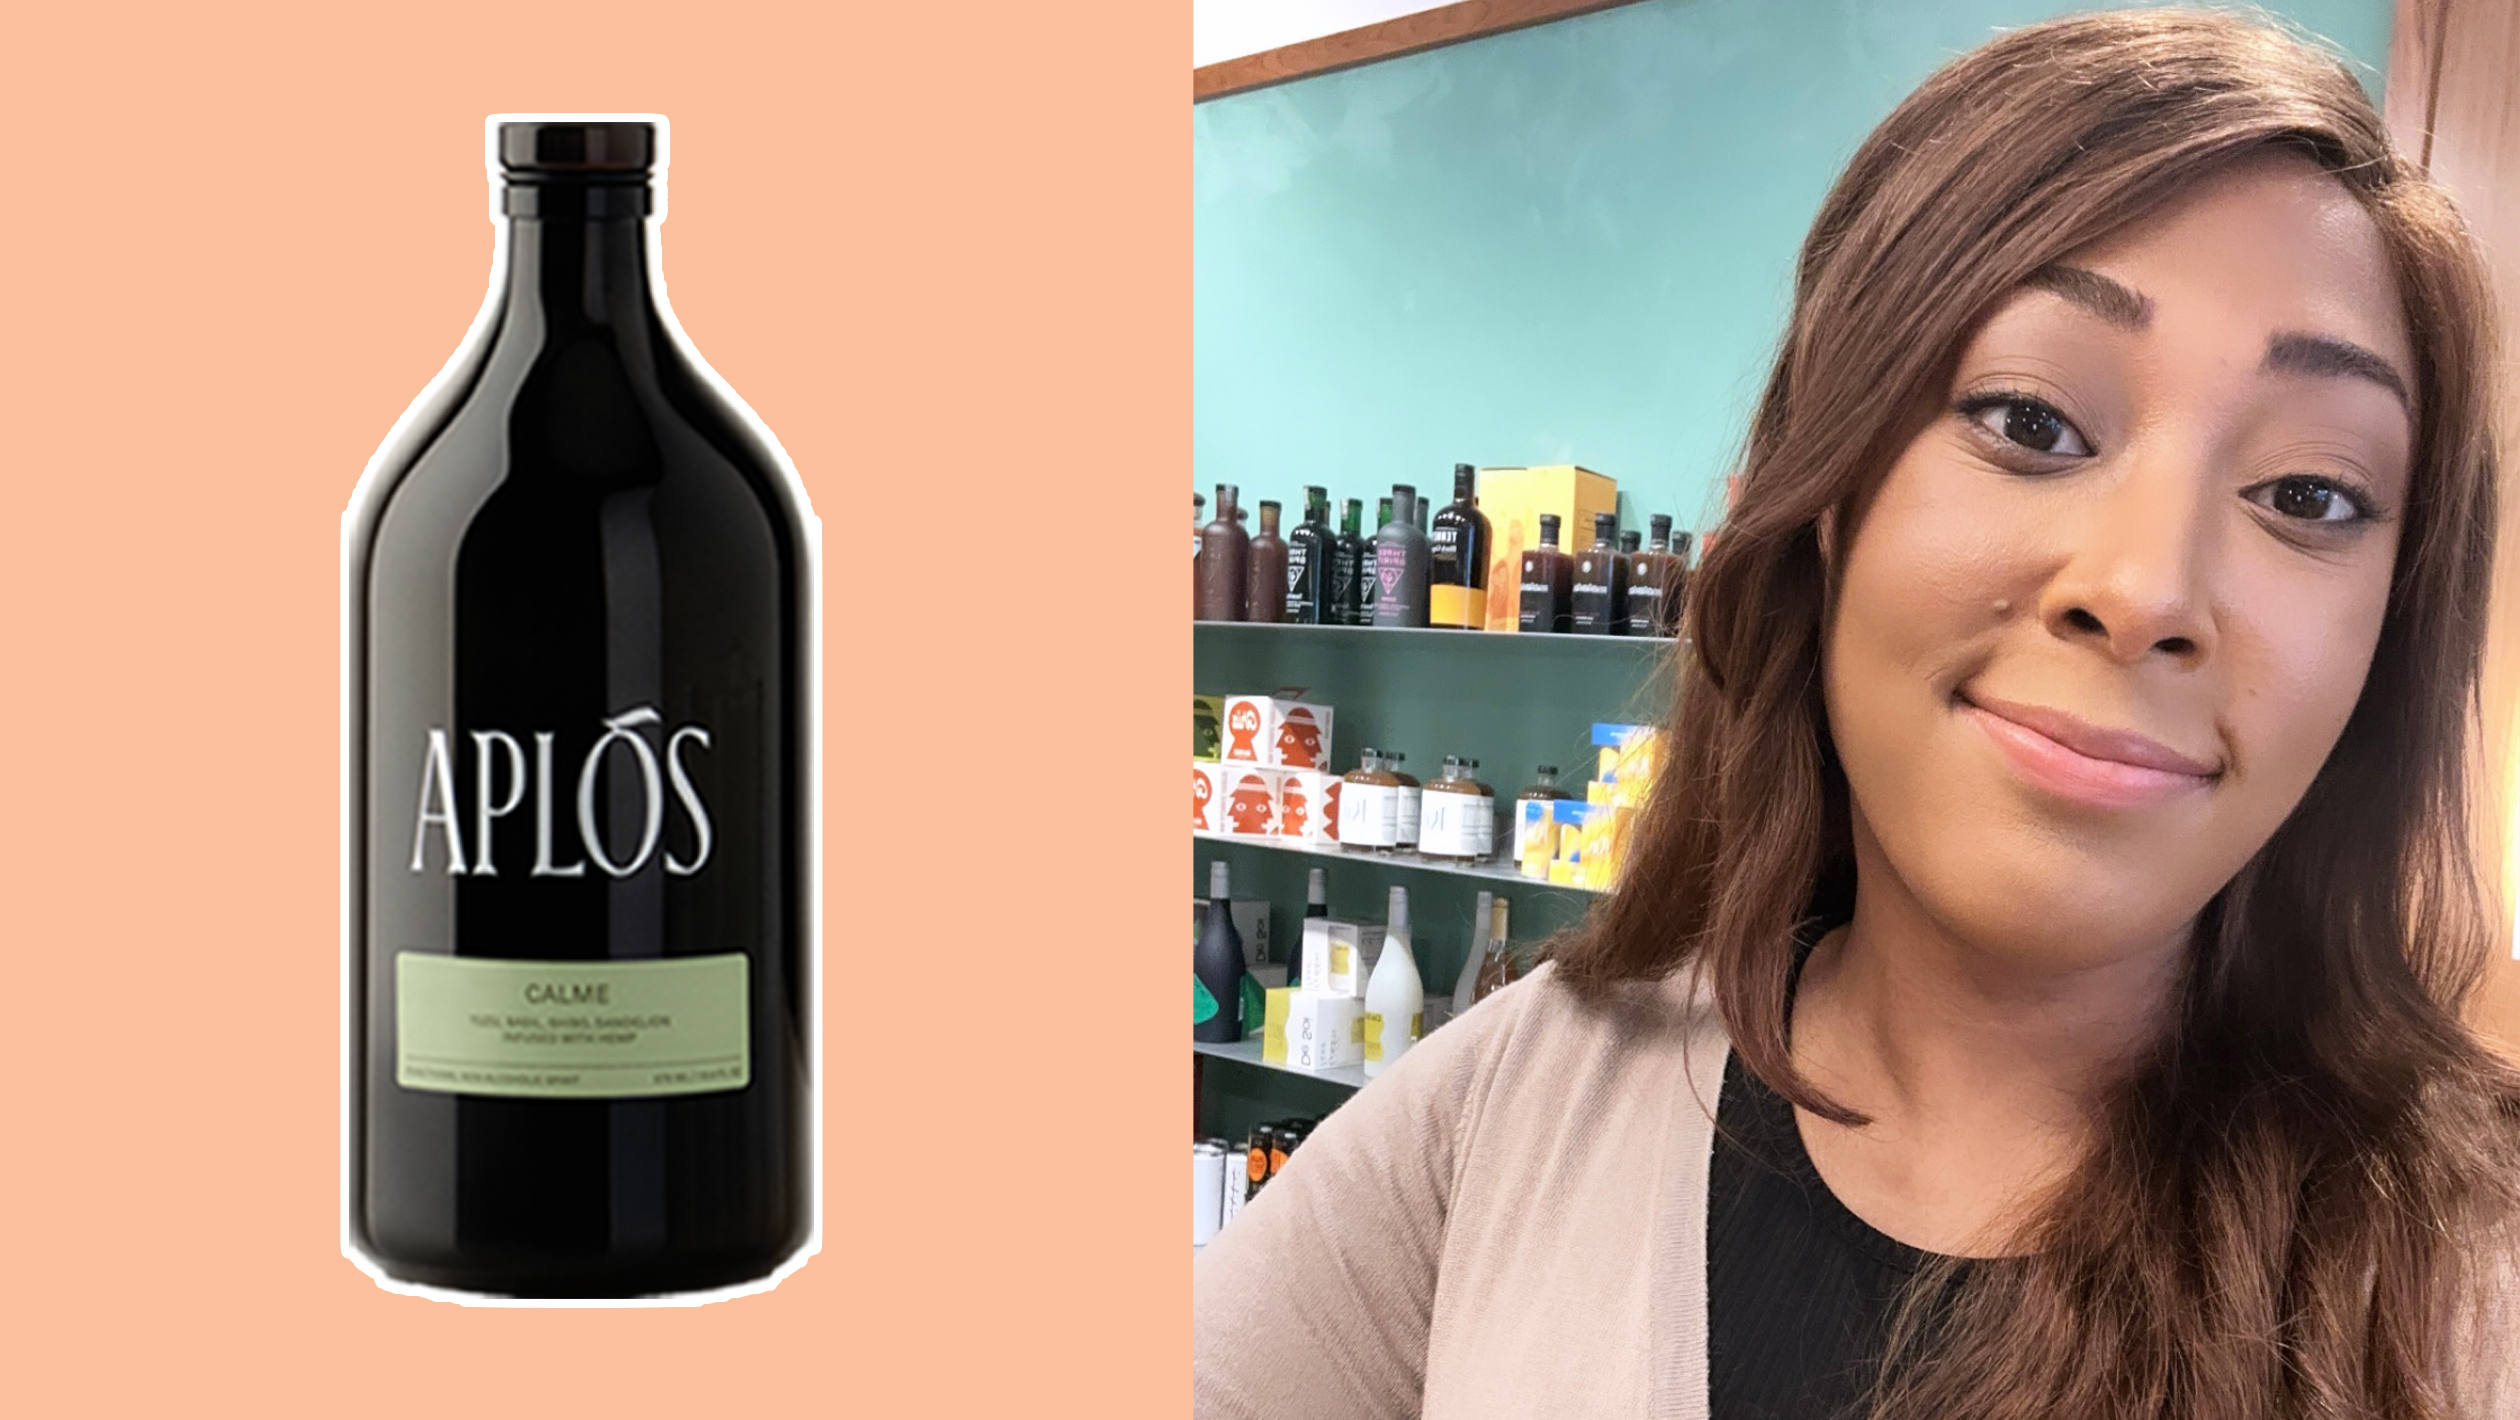 Aplós Calme, selected by Arianna Laidley the retail manager of Boisson, Photos courtesy of Arianna Laidley.